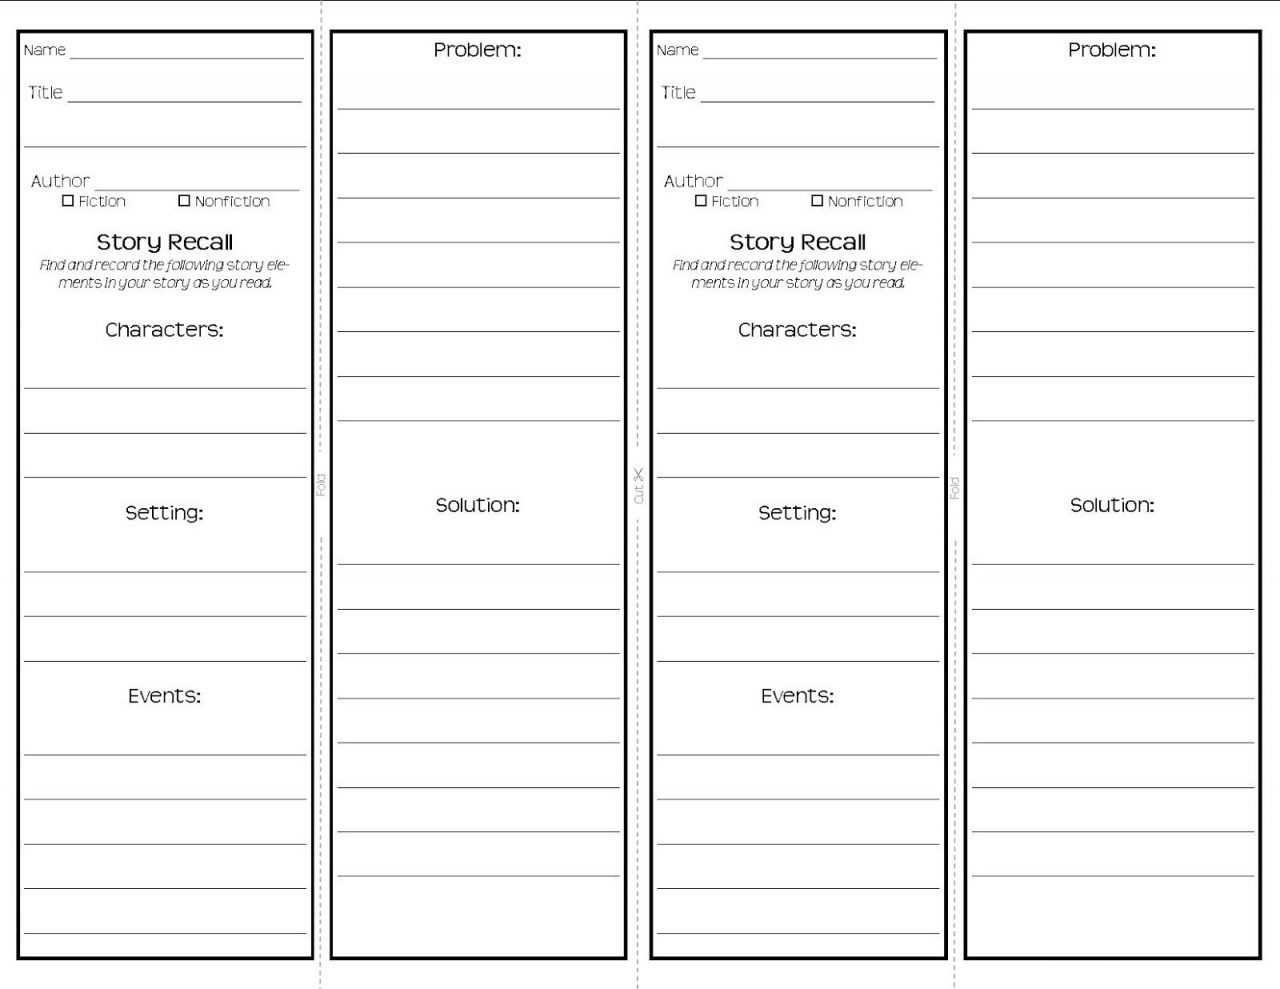 Bookmark Template For Word - Dalep.midnightpig.co With Free Blank Bookmark Templates To Print